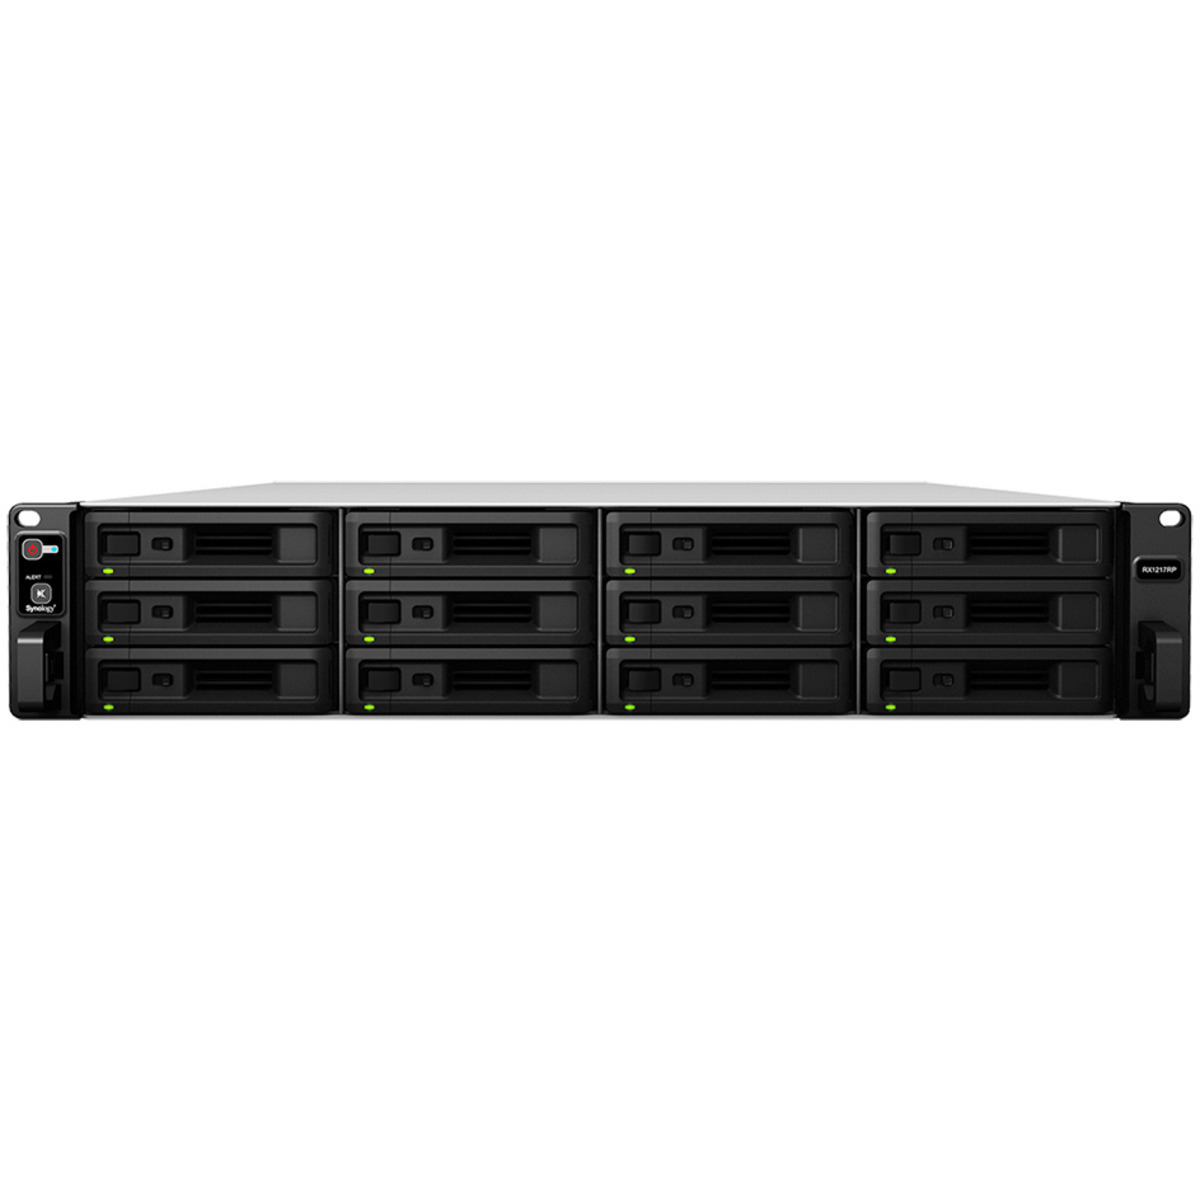 buy $2806 Synology RX1217 6tb RackMount Expansion Enclosure 12x500gb Samsung 870 EVO MZ-77E500BAM 2.5 SATA 6Gb/s SSD CONSUMER Class Drives Installed - Burn-In Tested - nas headquarters buy network attached storage server device das new raid-5 free shipping usa christmas new year holiday sale RX1217